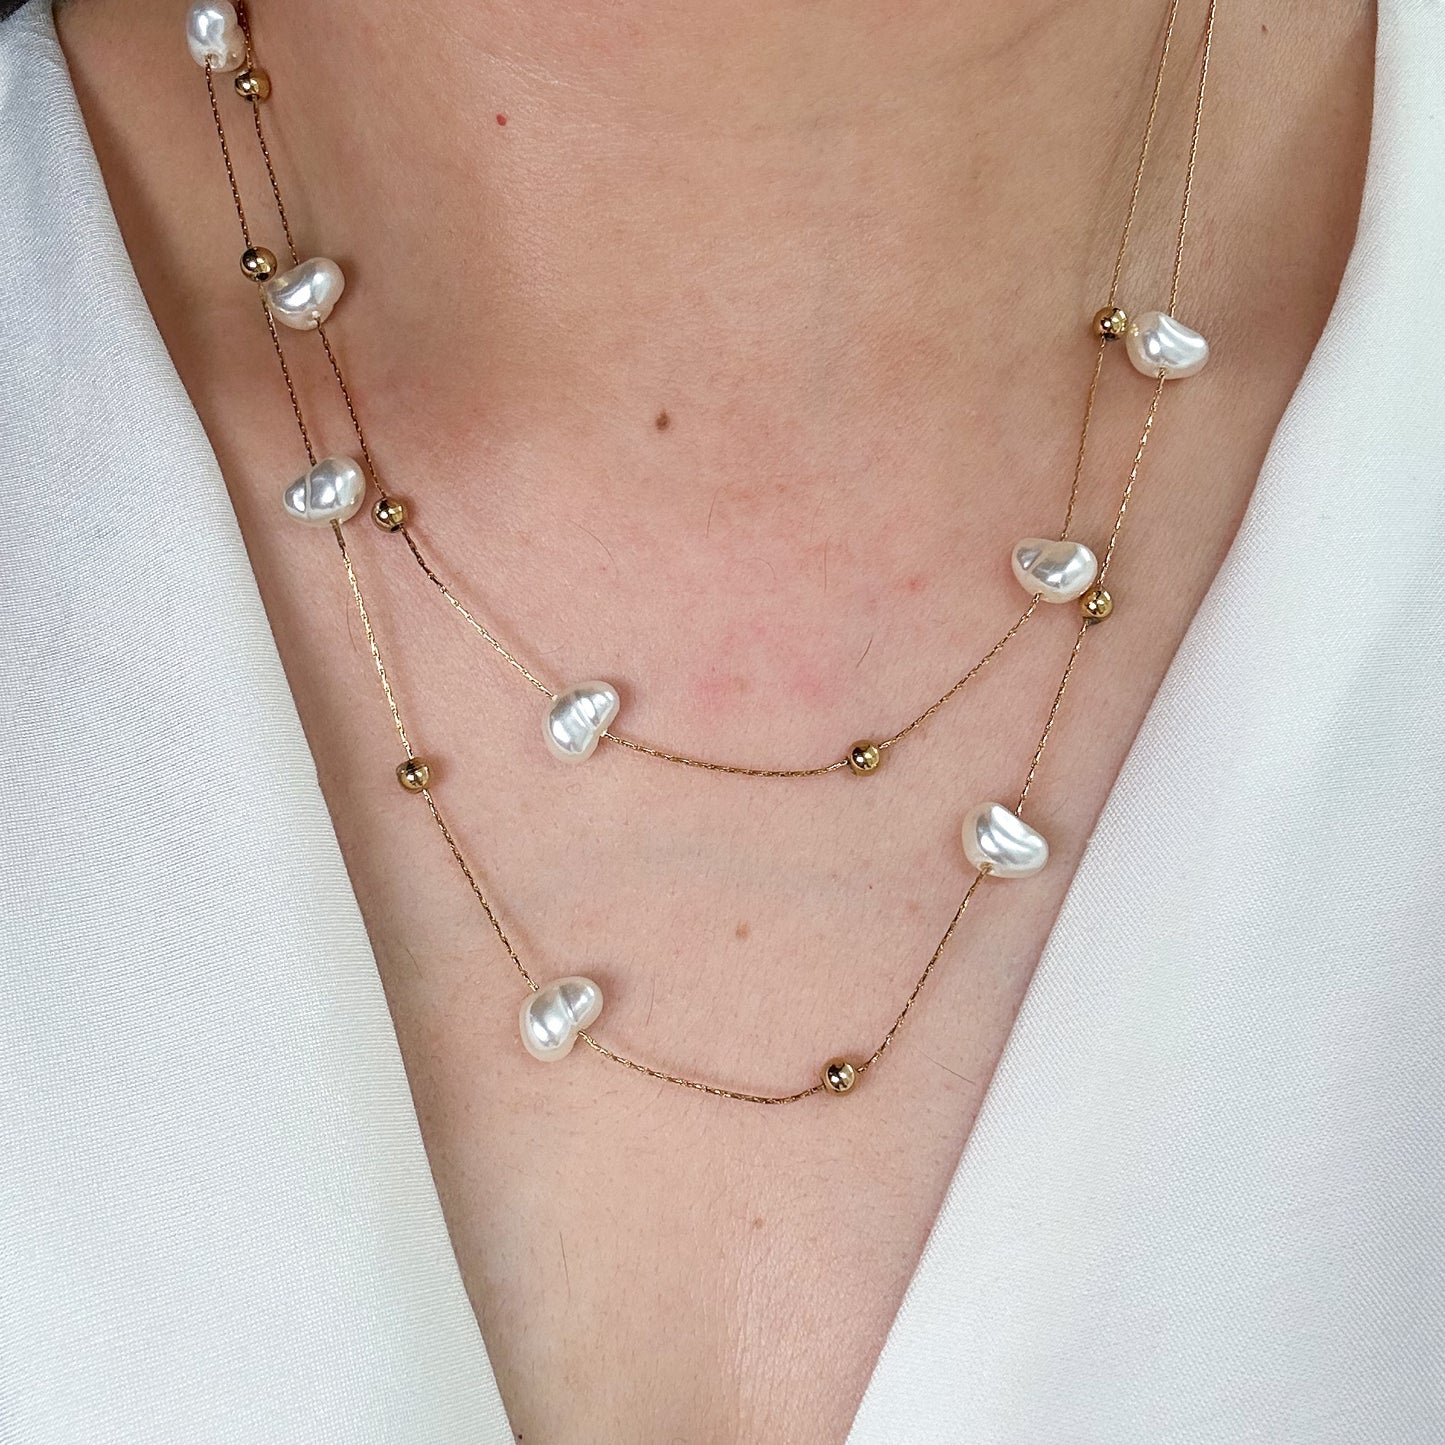 Nancy Pearl Layered Necklace